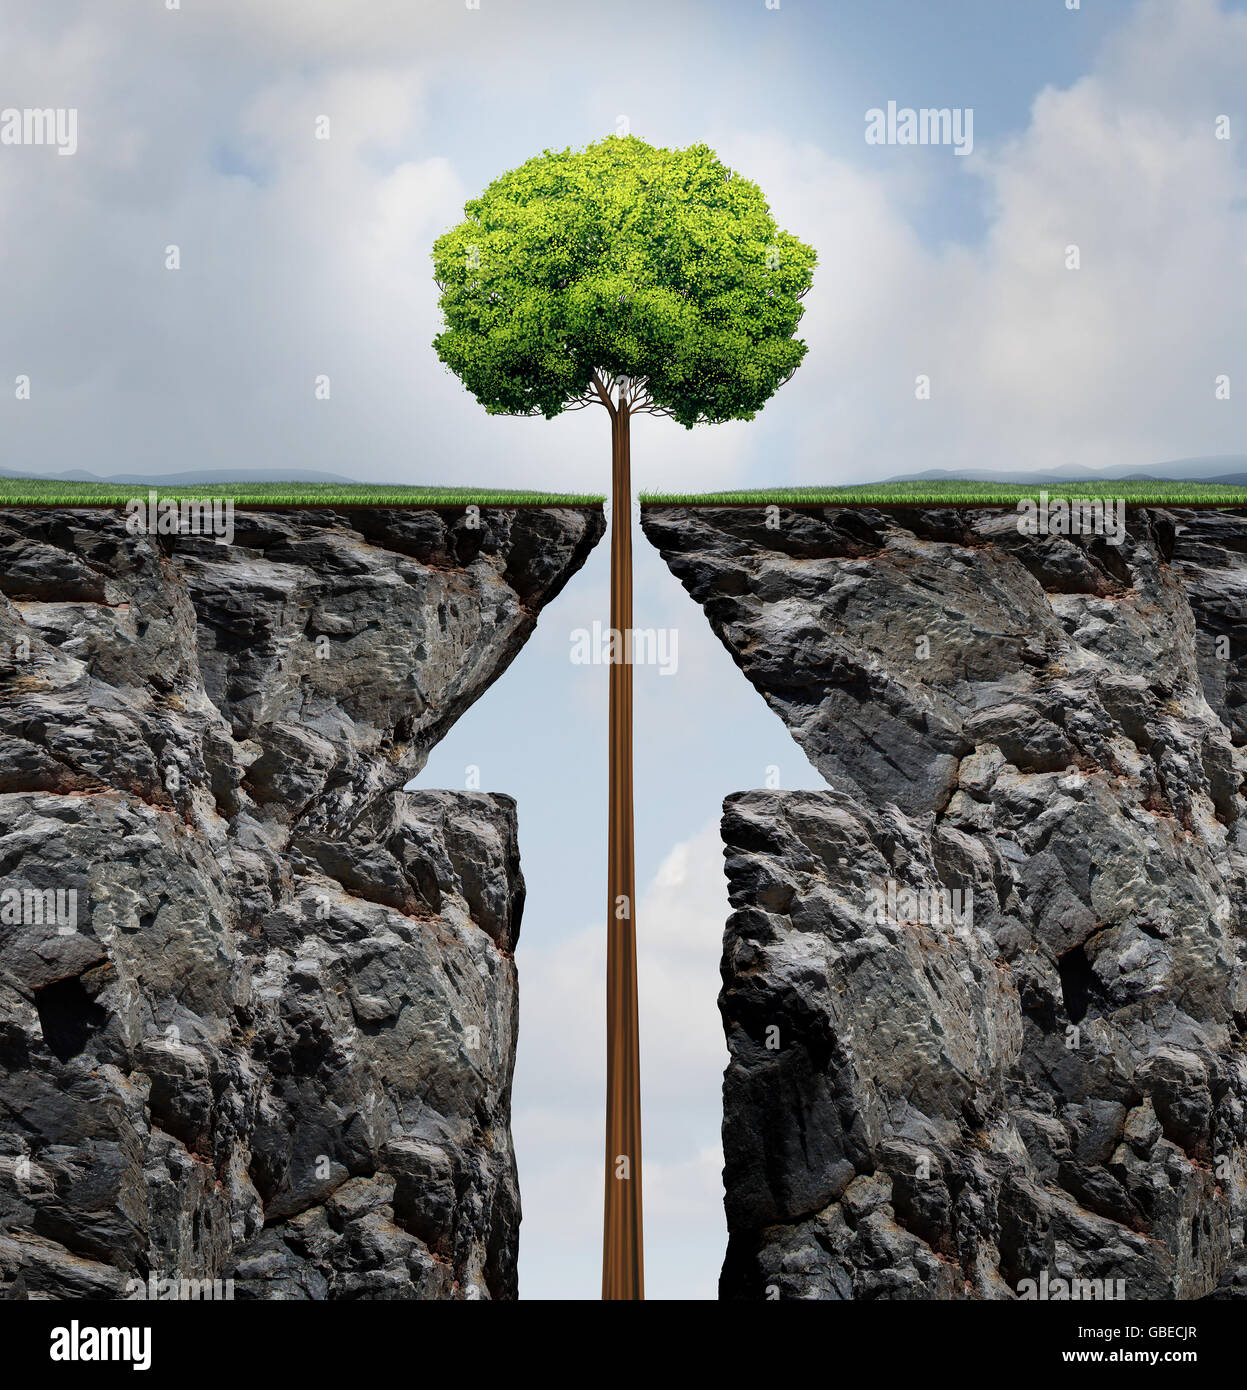 Success concept or rising growth tree in business as a growing plant emerging out of a mountain cliff shaped as an upward arrow Stock Photo